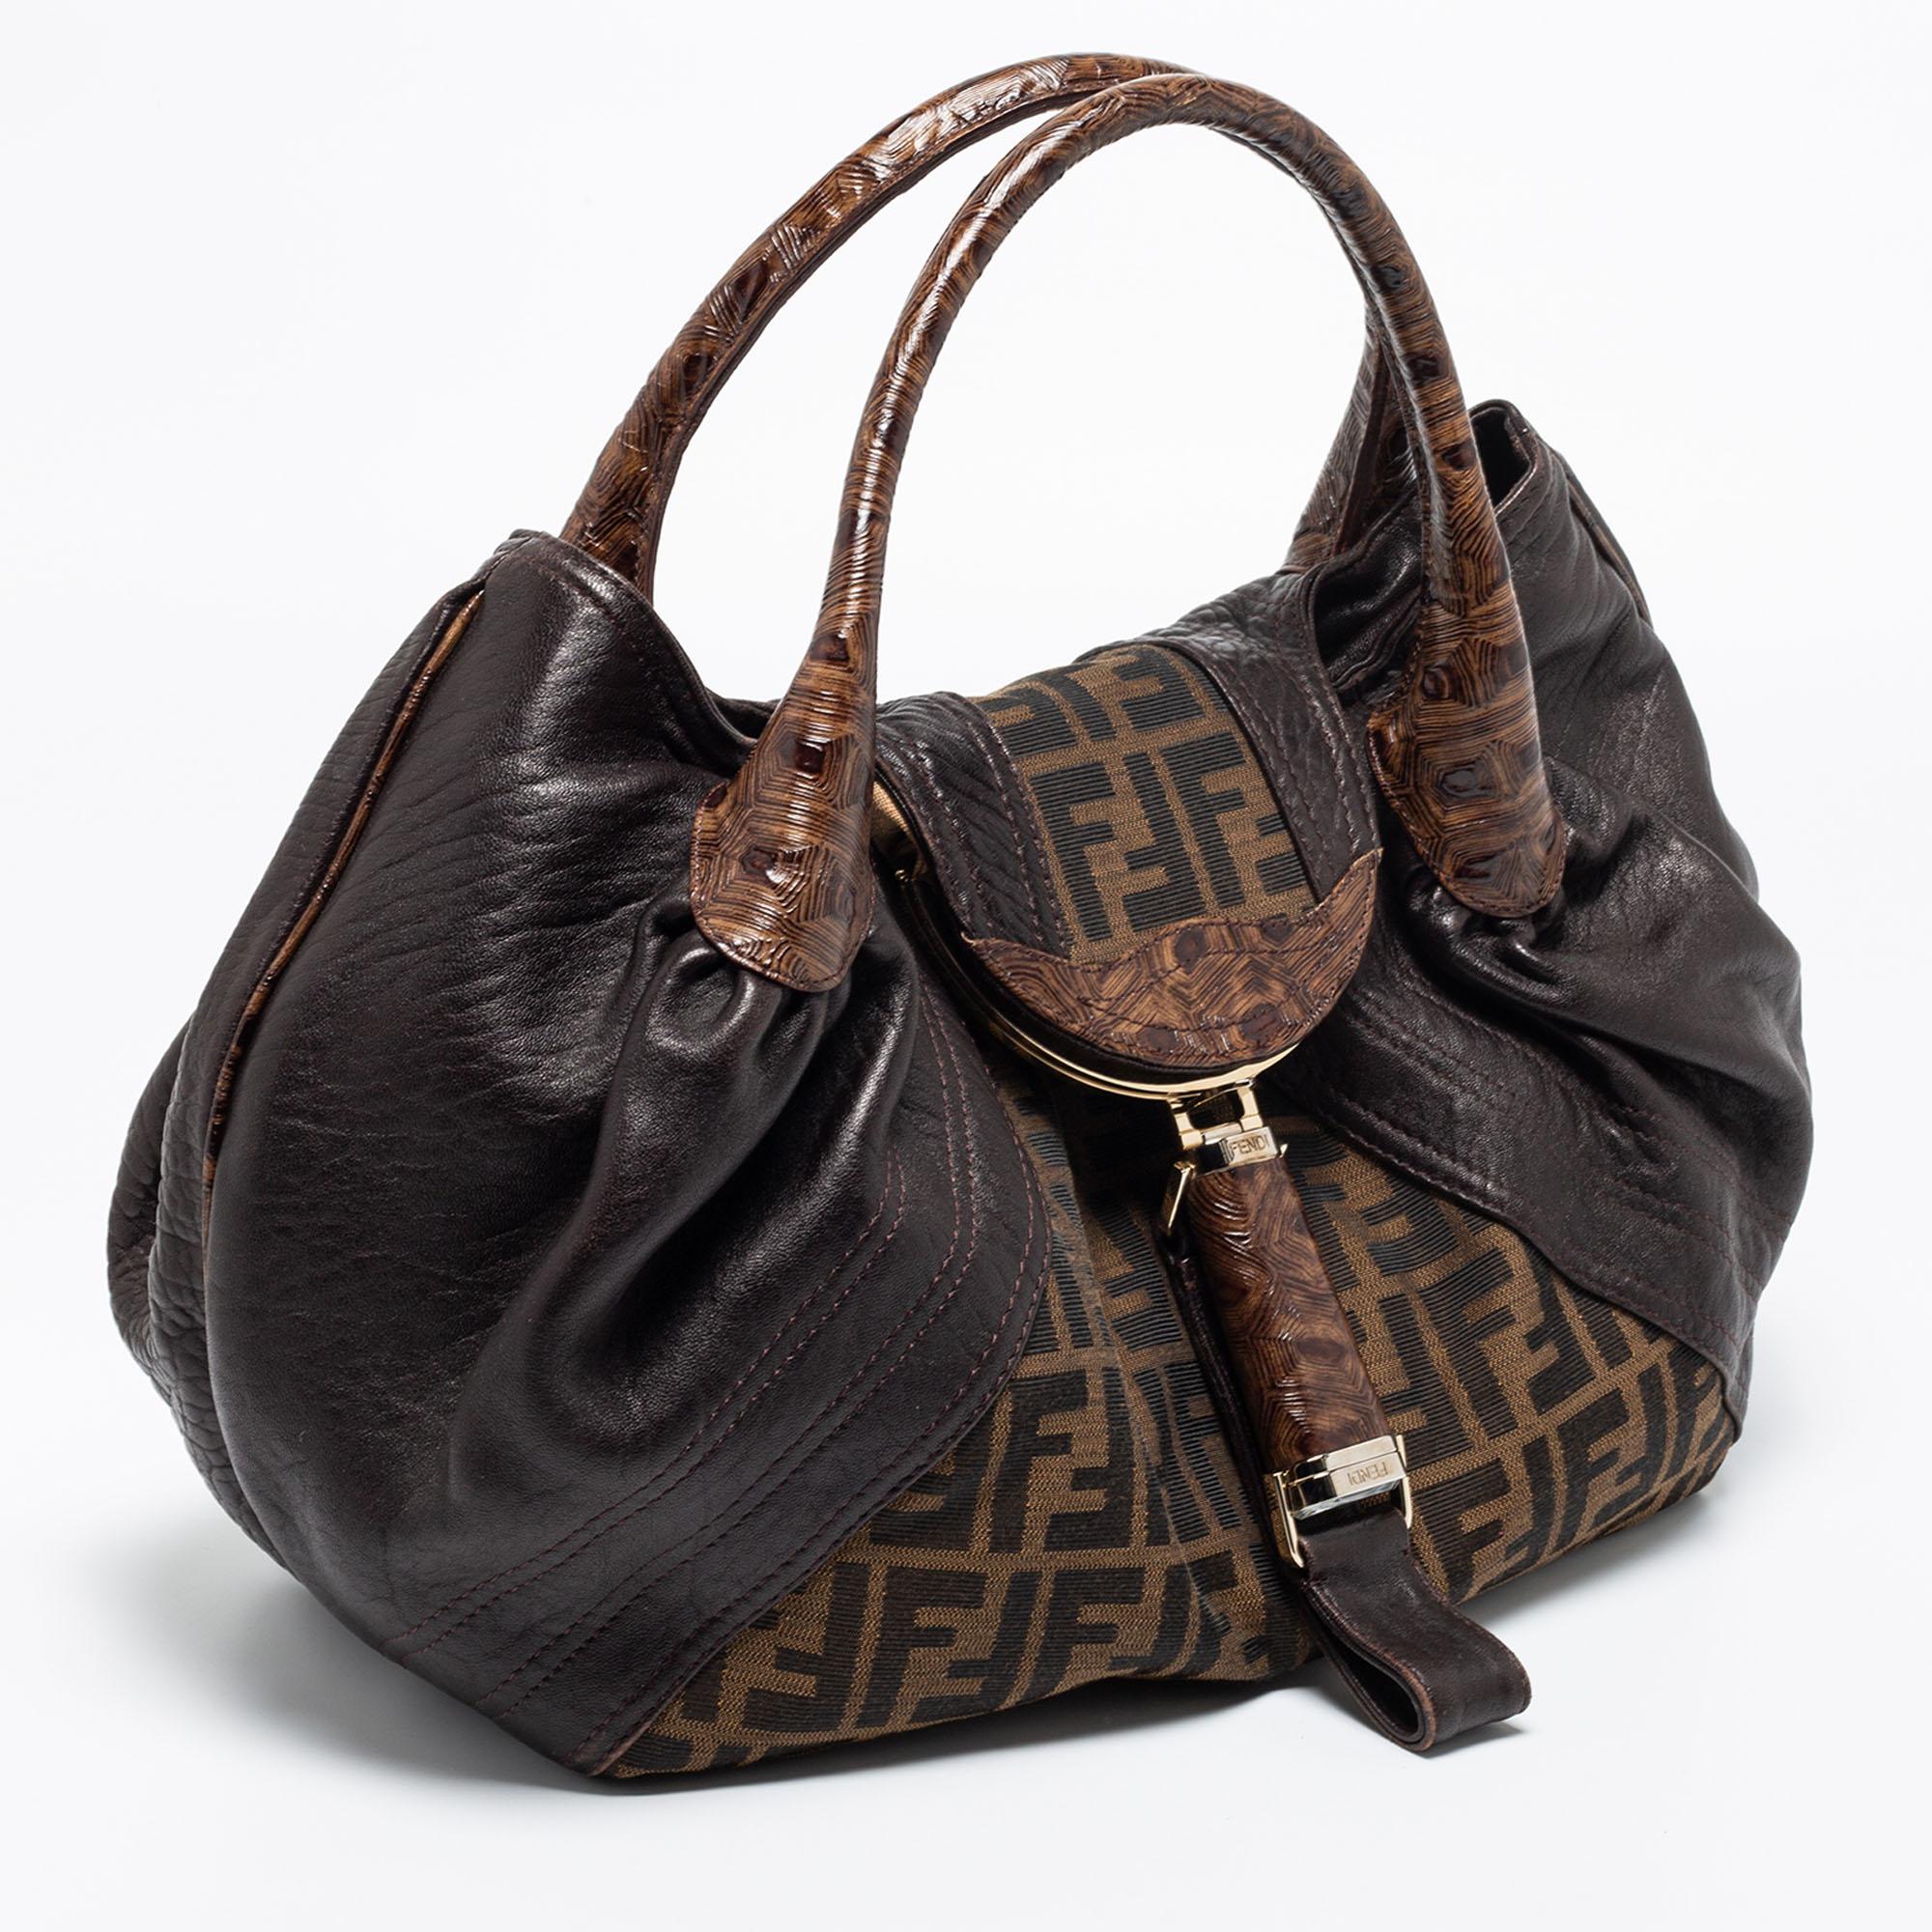 Black Fendi Tobacco Zucca Canvas and Textured Leather Spy Bag